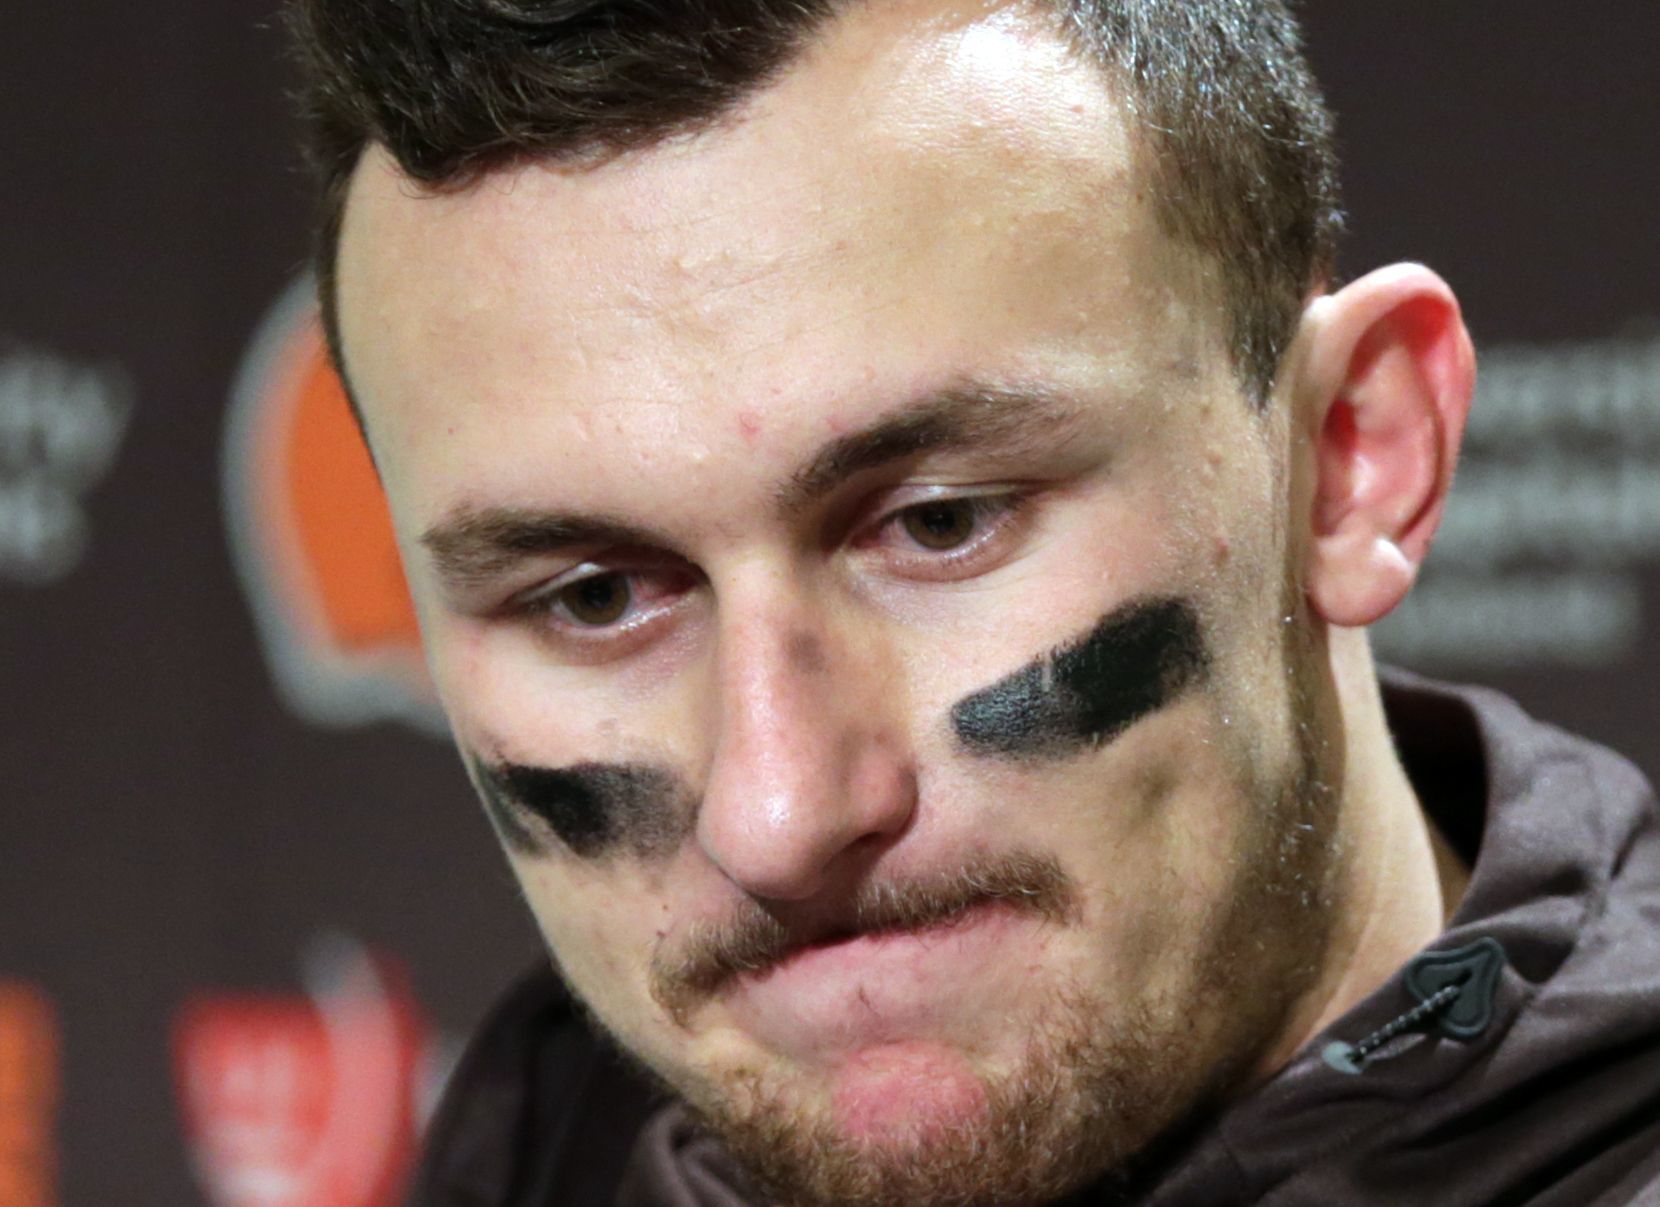 In this Dec. 20, 2015, photo, Cleveland Browns quarterback Johnny Manziel speaks with media members following the team’s 30-13 loss to the Seattle Seahawks in an NFL football game in Seattle.